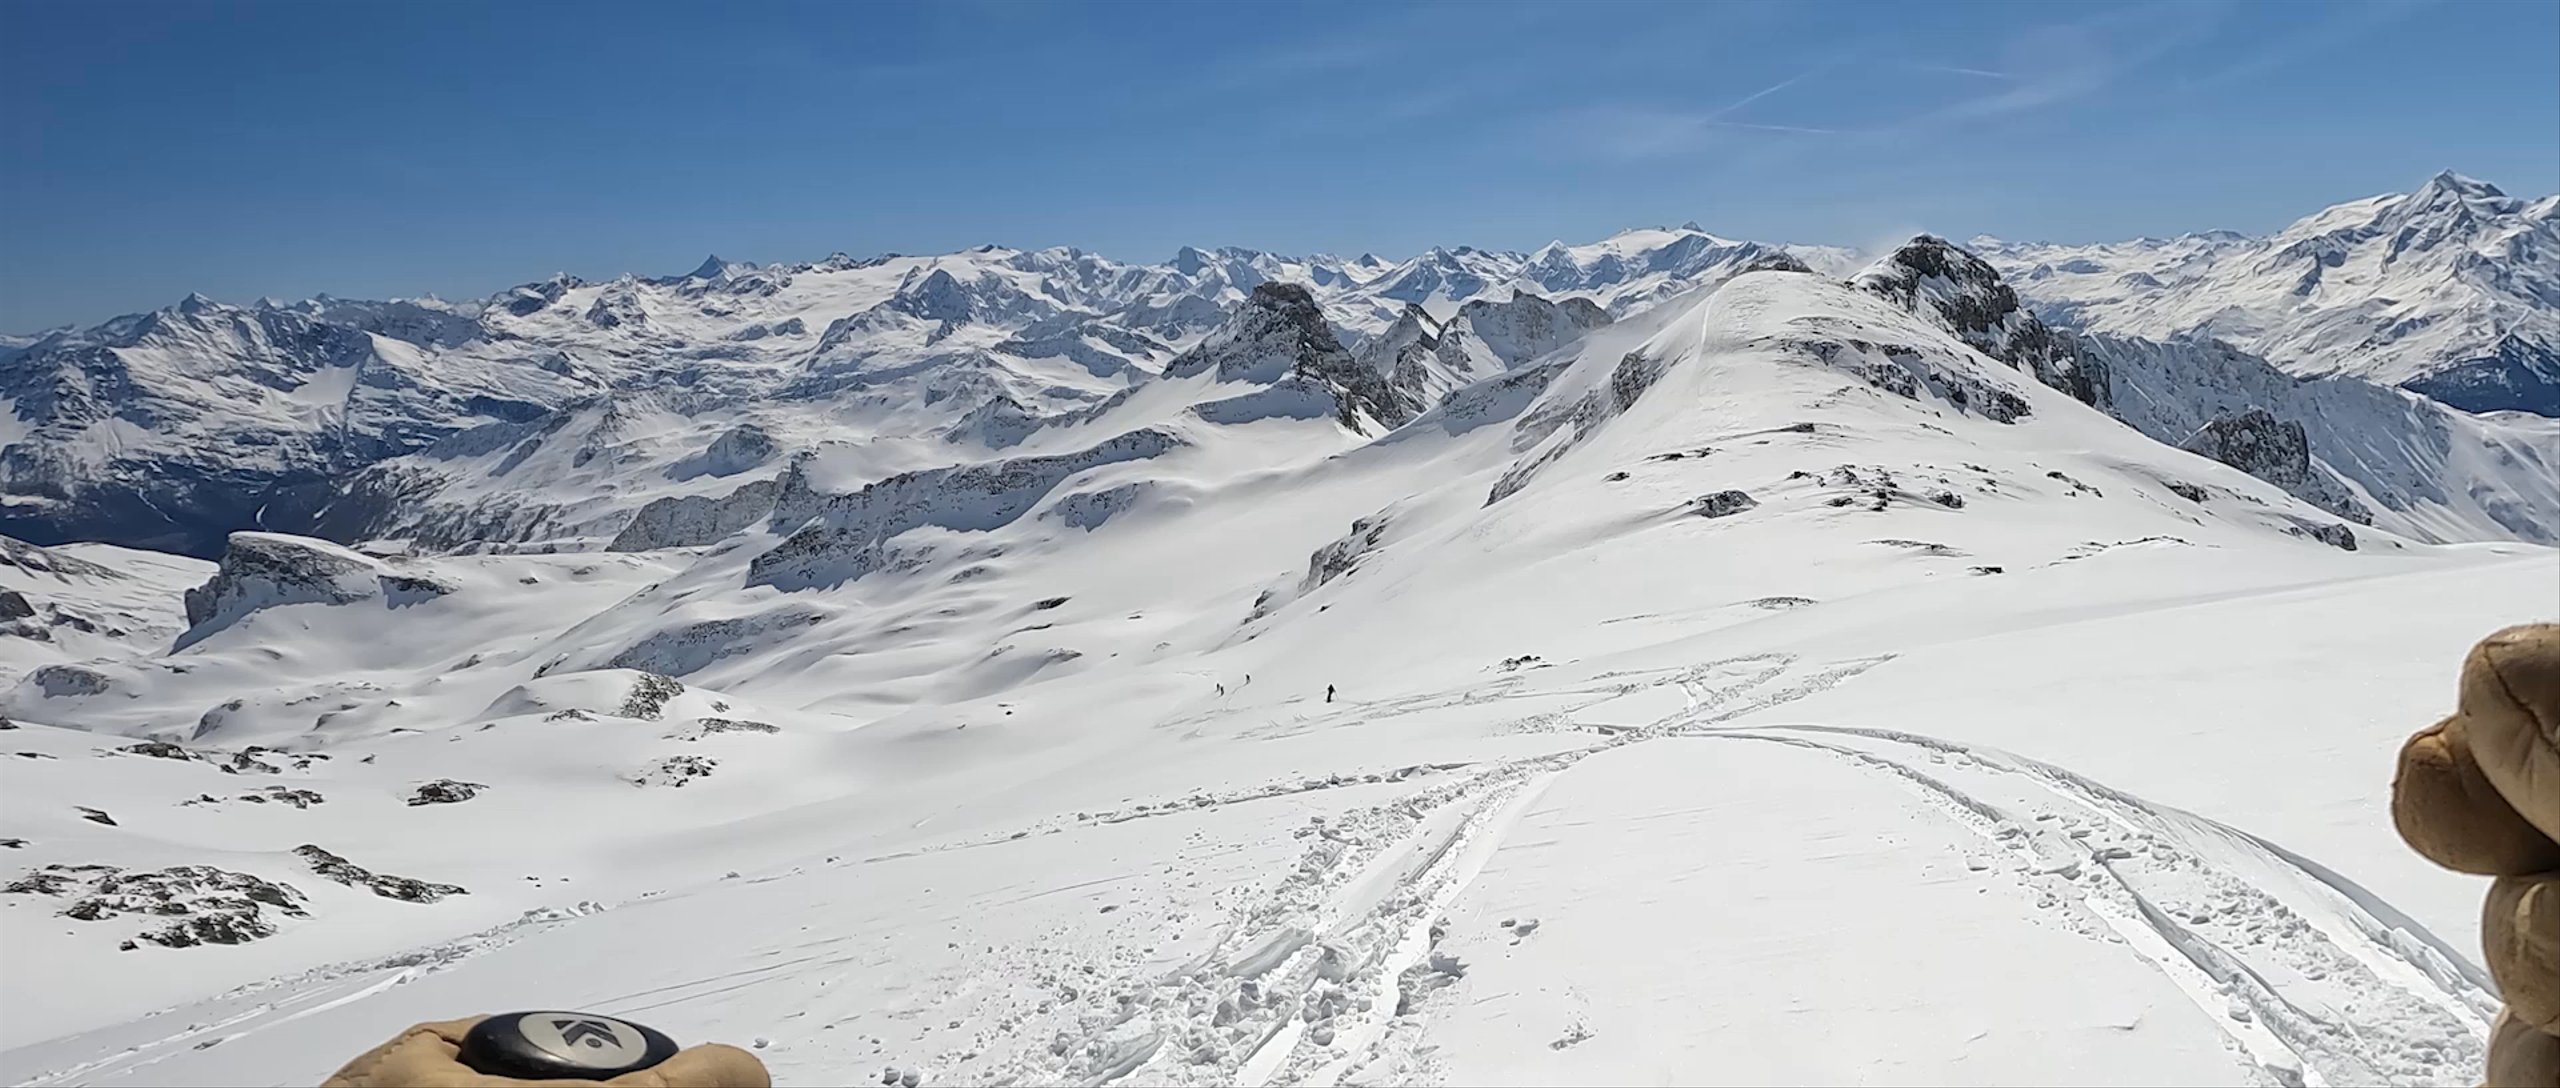 POV skiing down mountain in French Alps